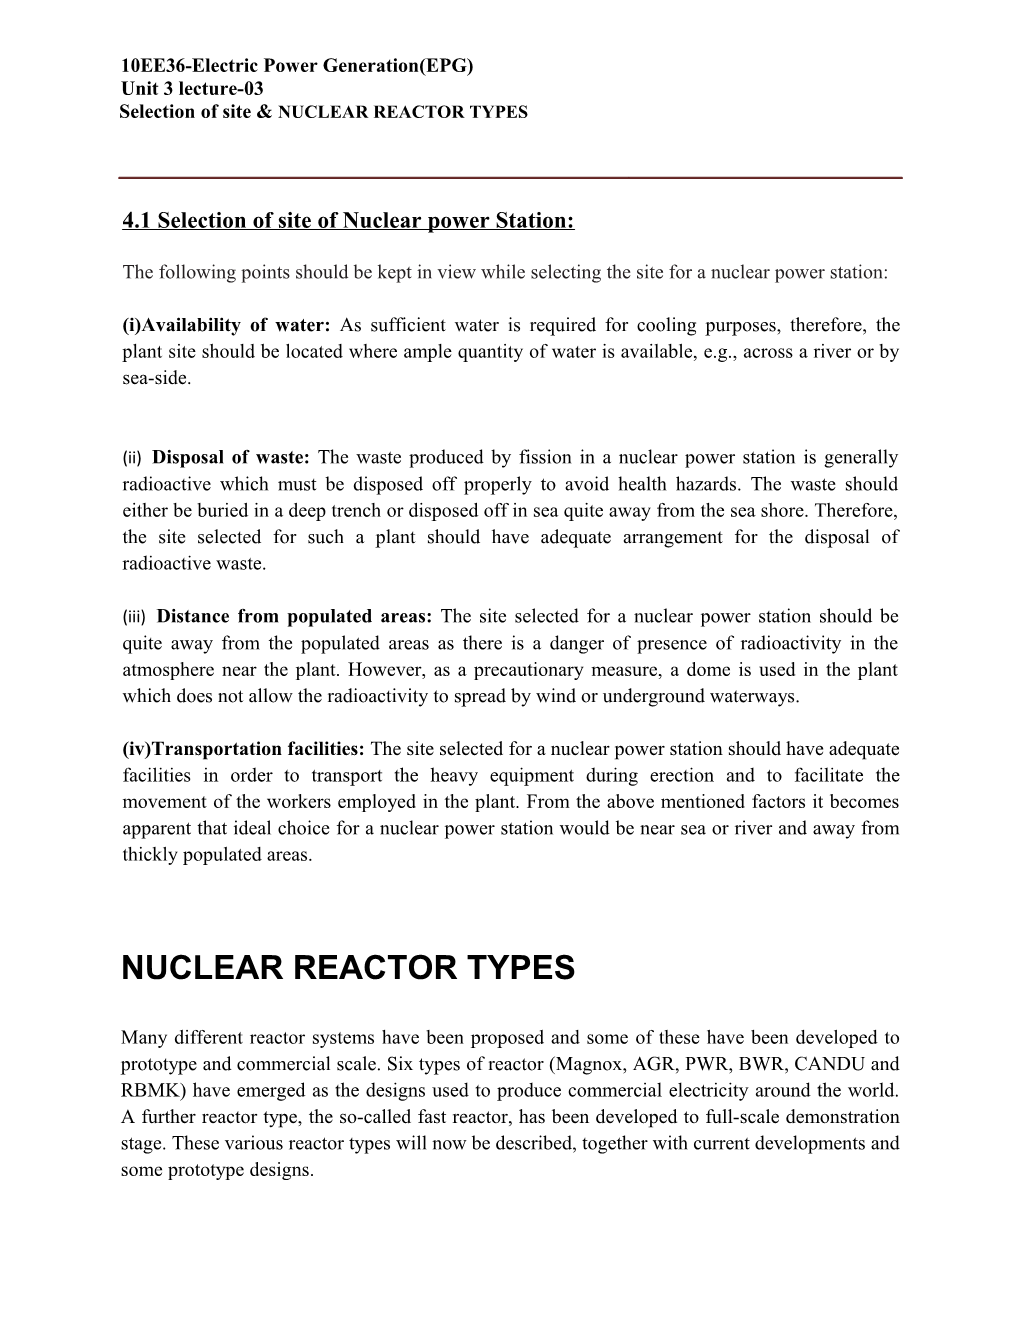 4.1 Selection of Site of Nuclear Power Station